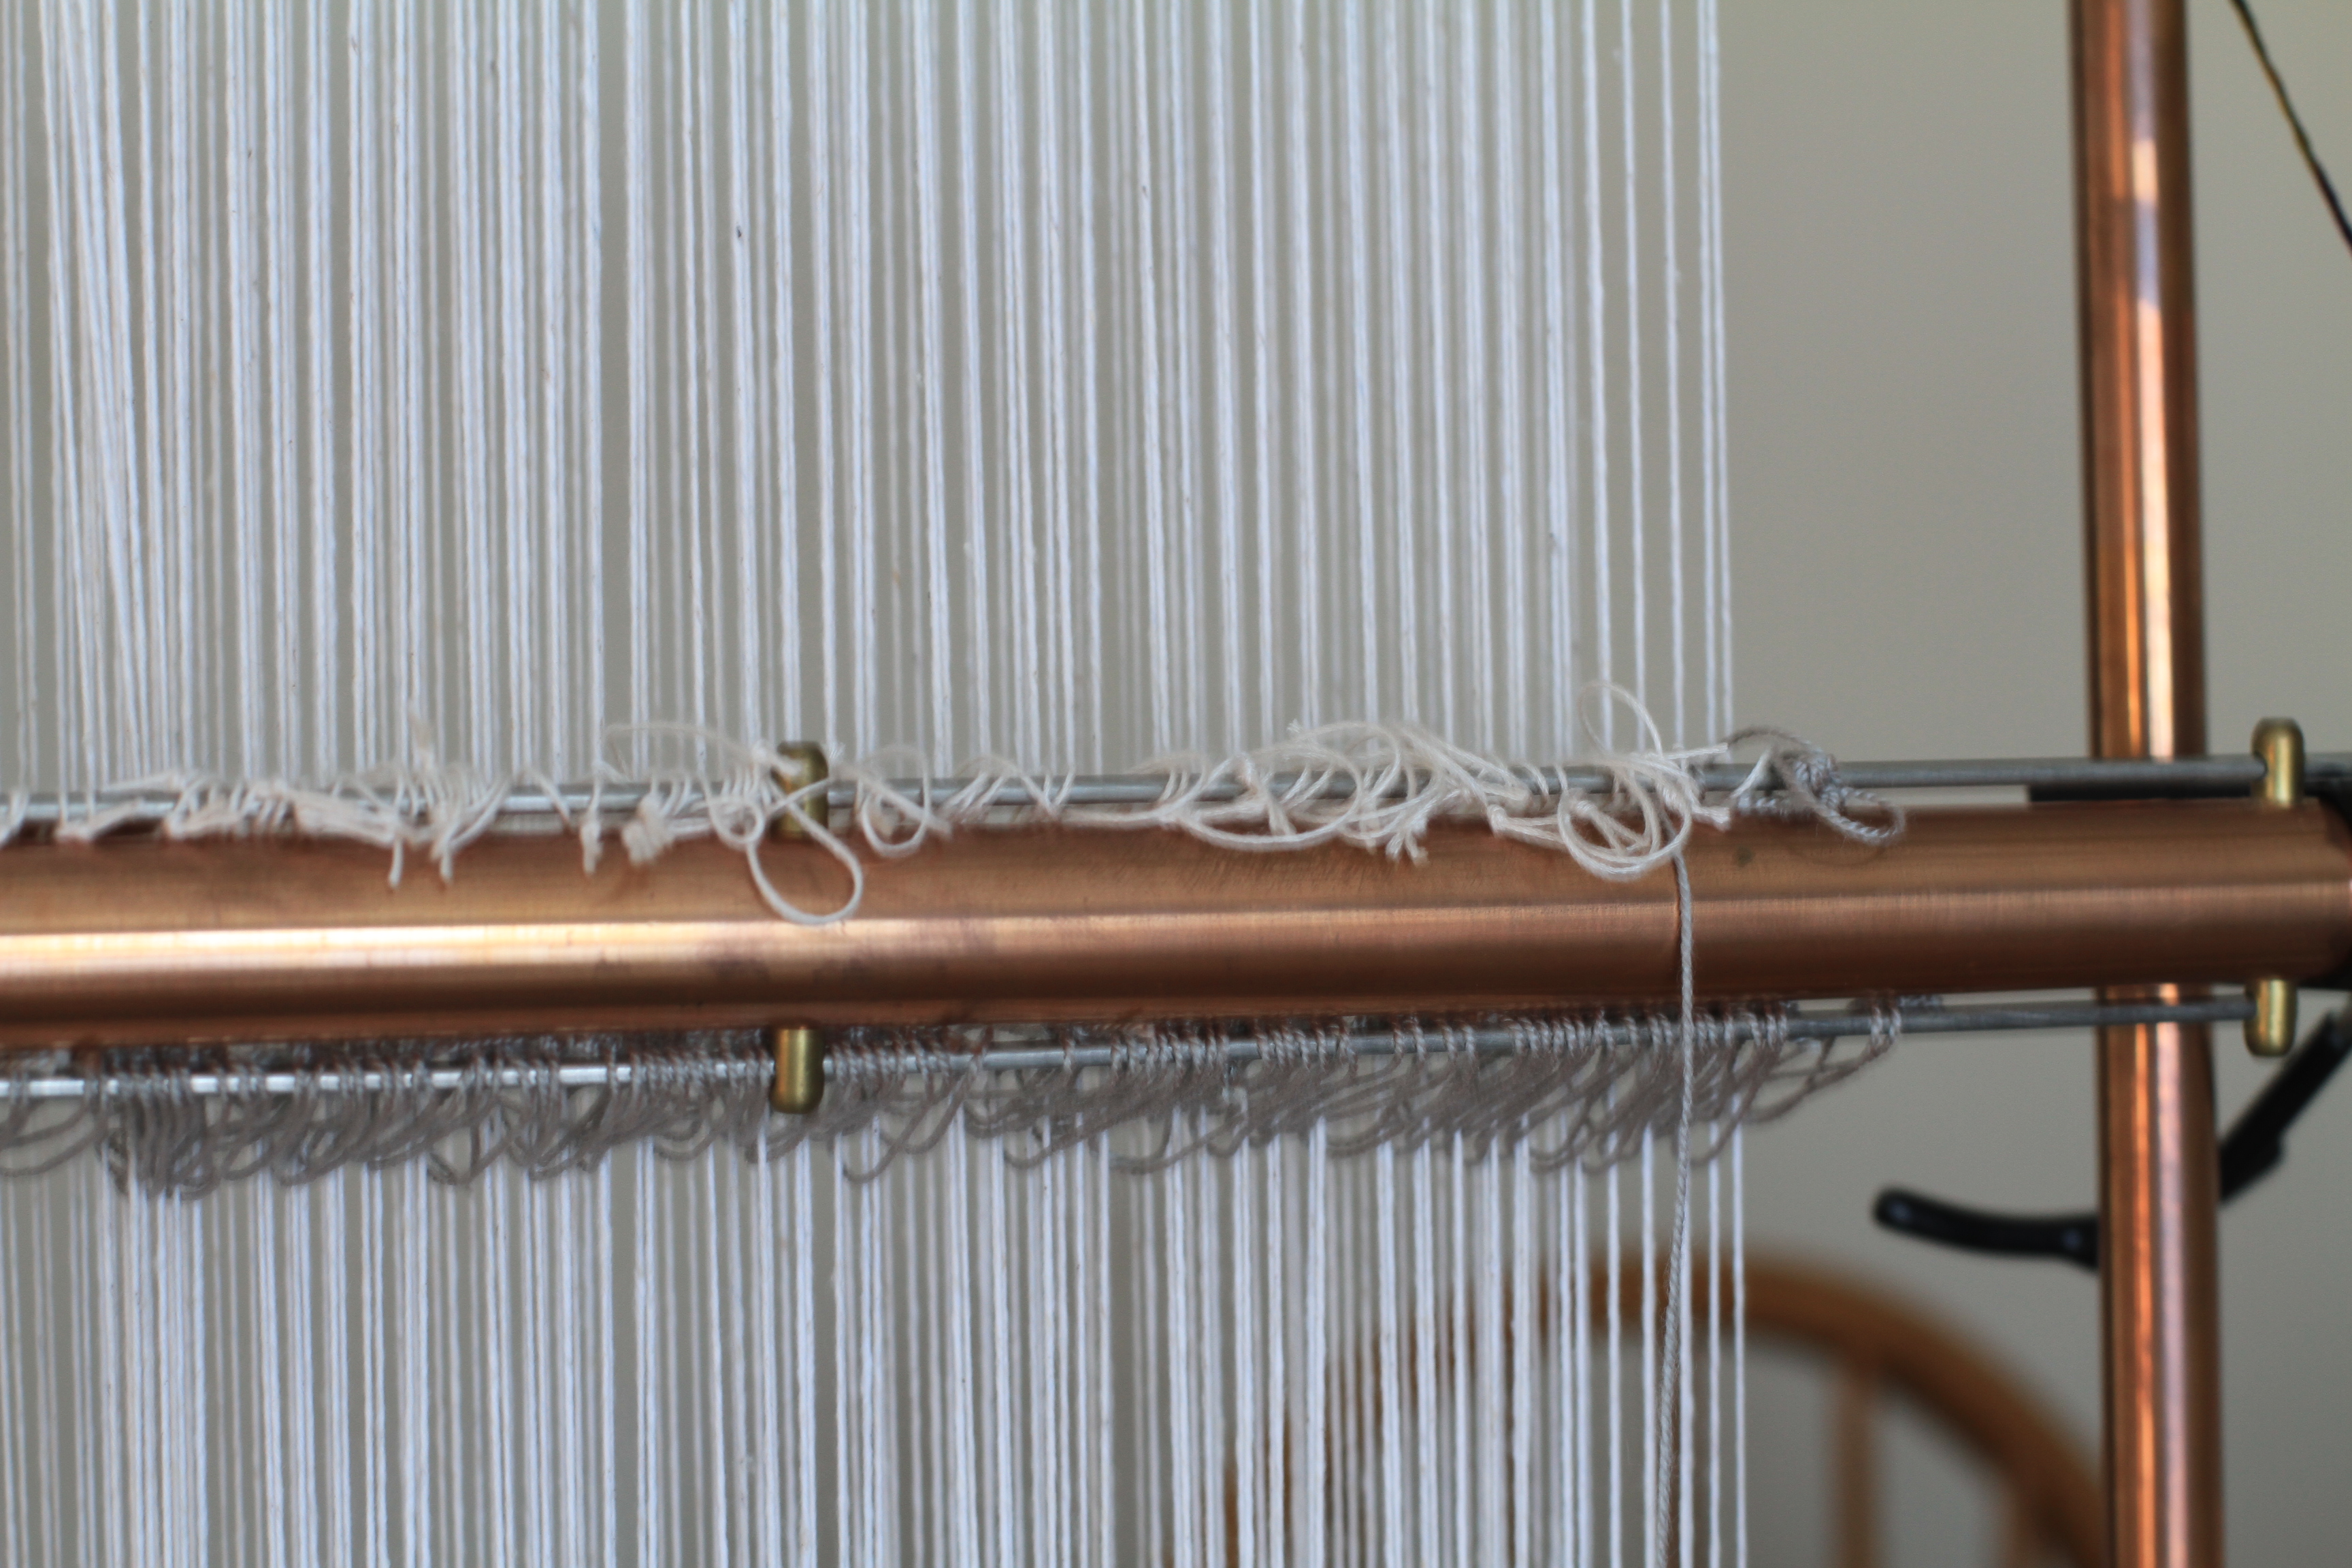 Adding Heddles to Tapestry Loom